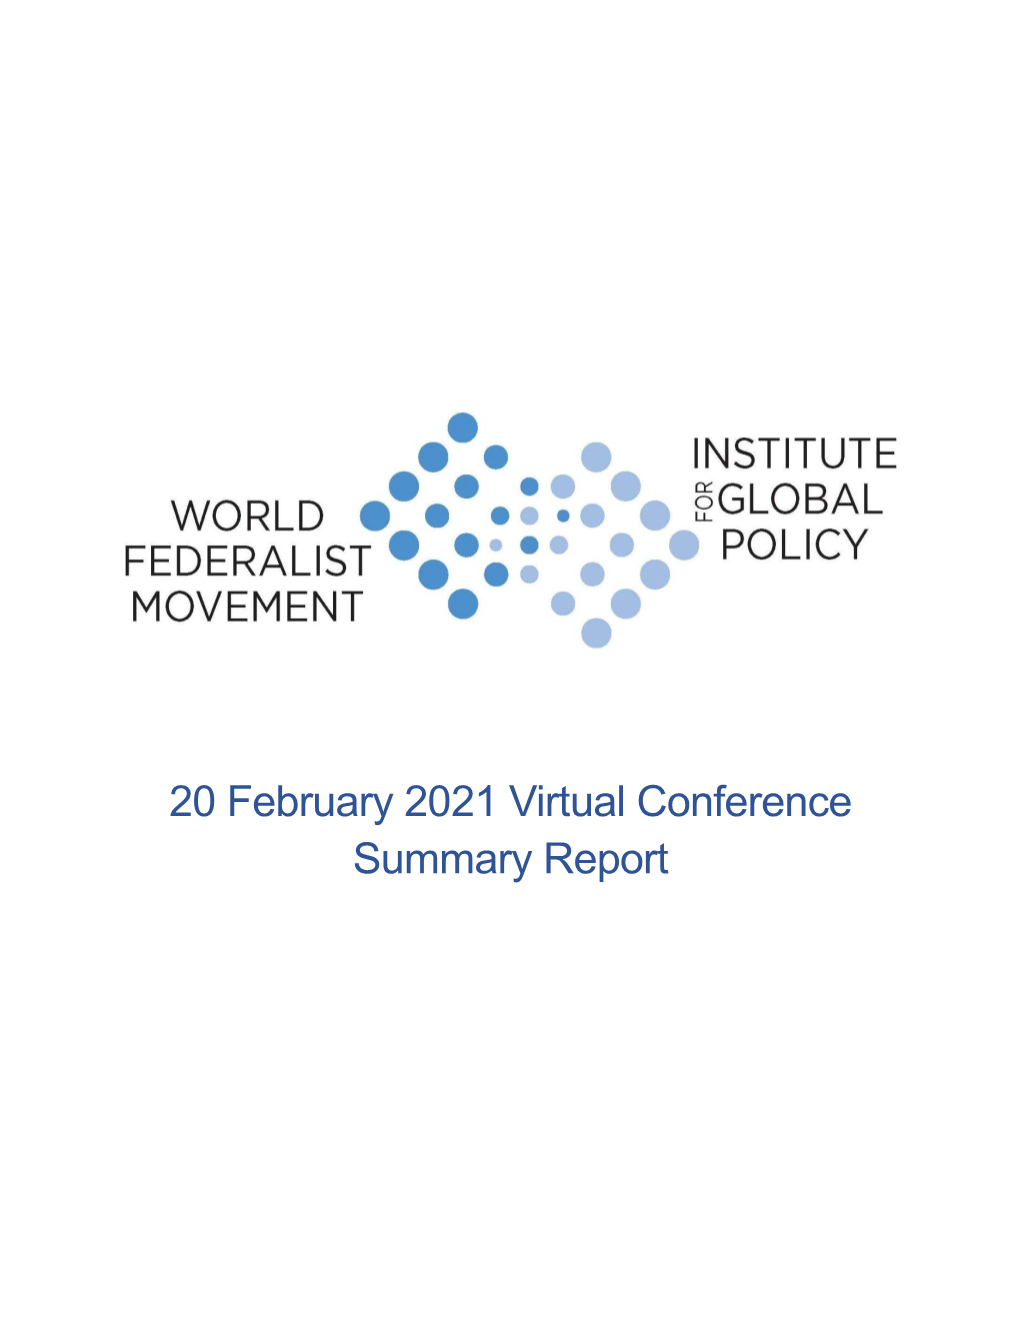 20 February 2021 Virtual Conference Summary Report